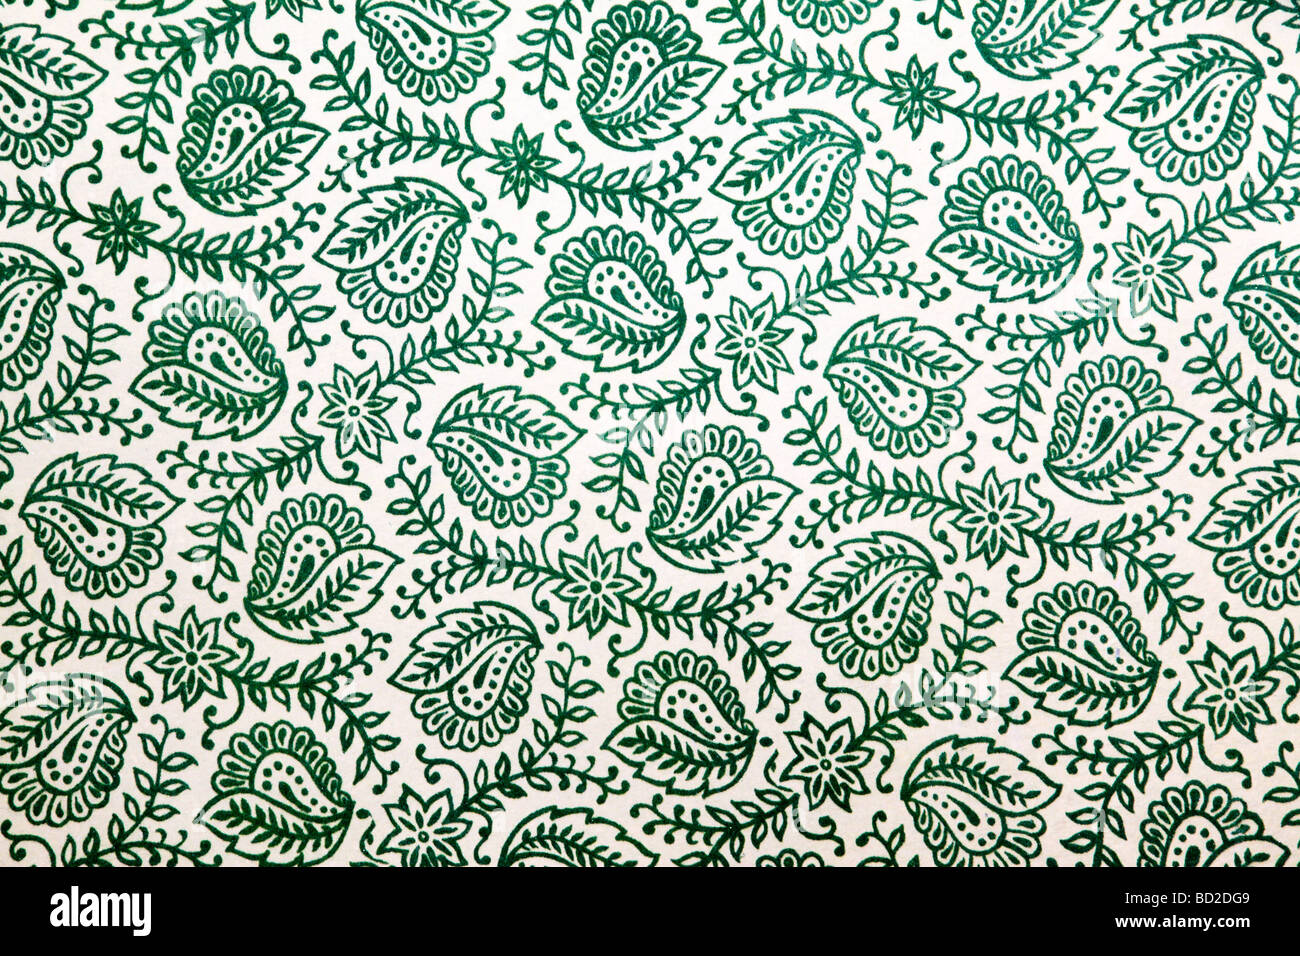 detail of green paisley pattern Stock Photo